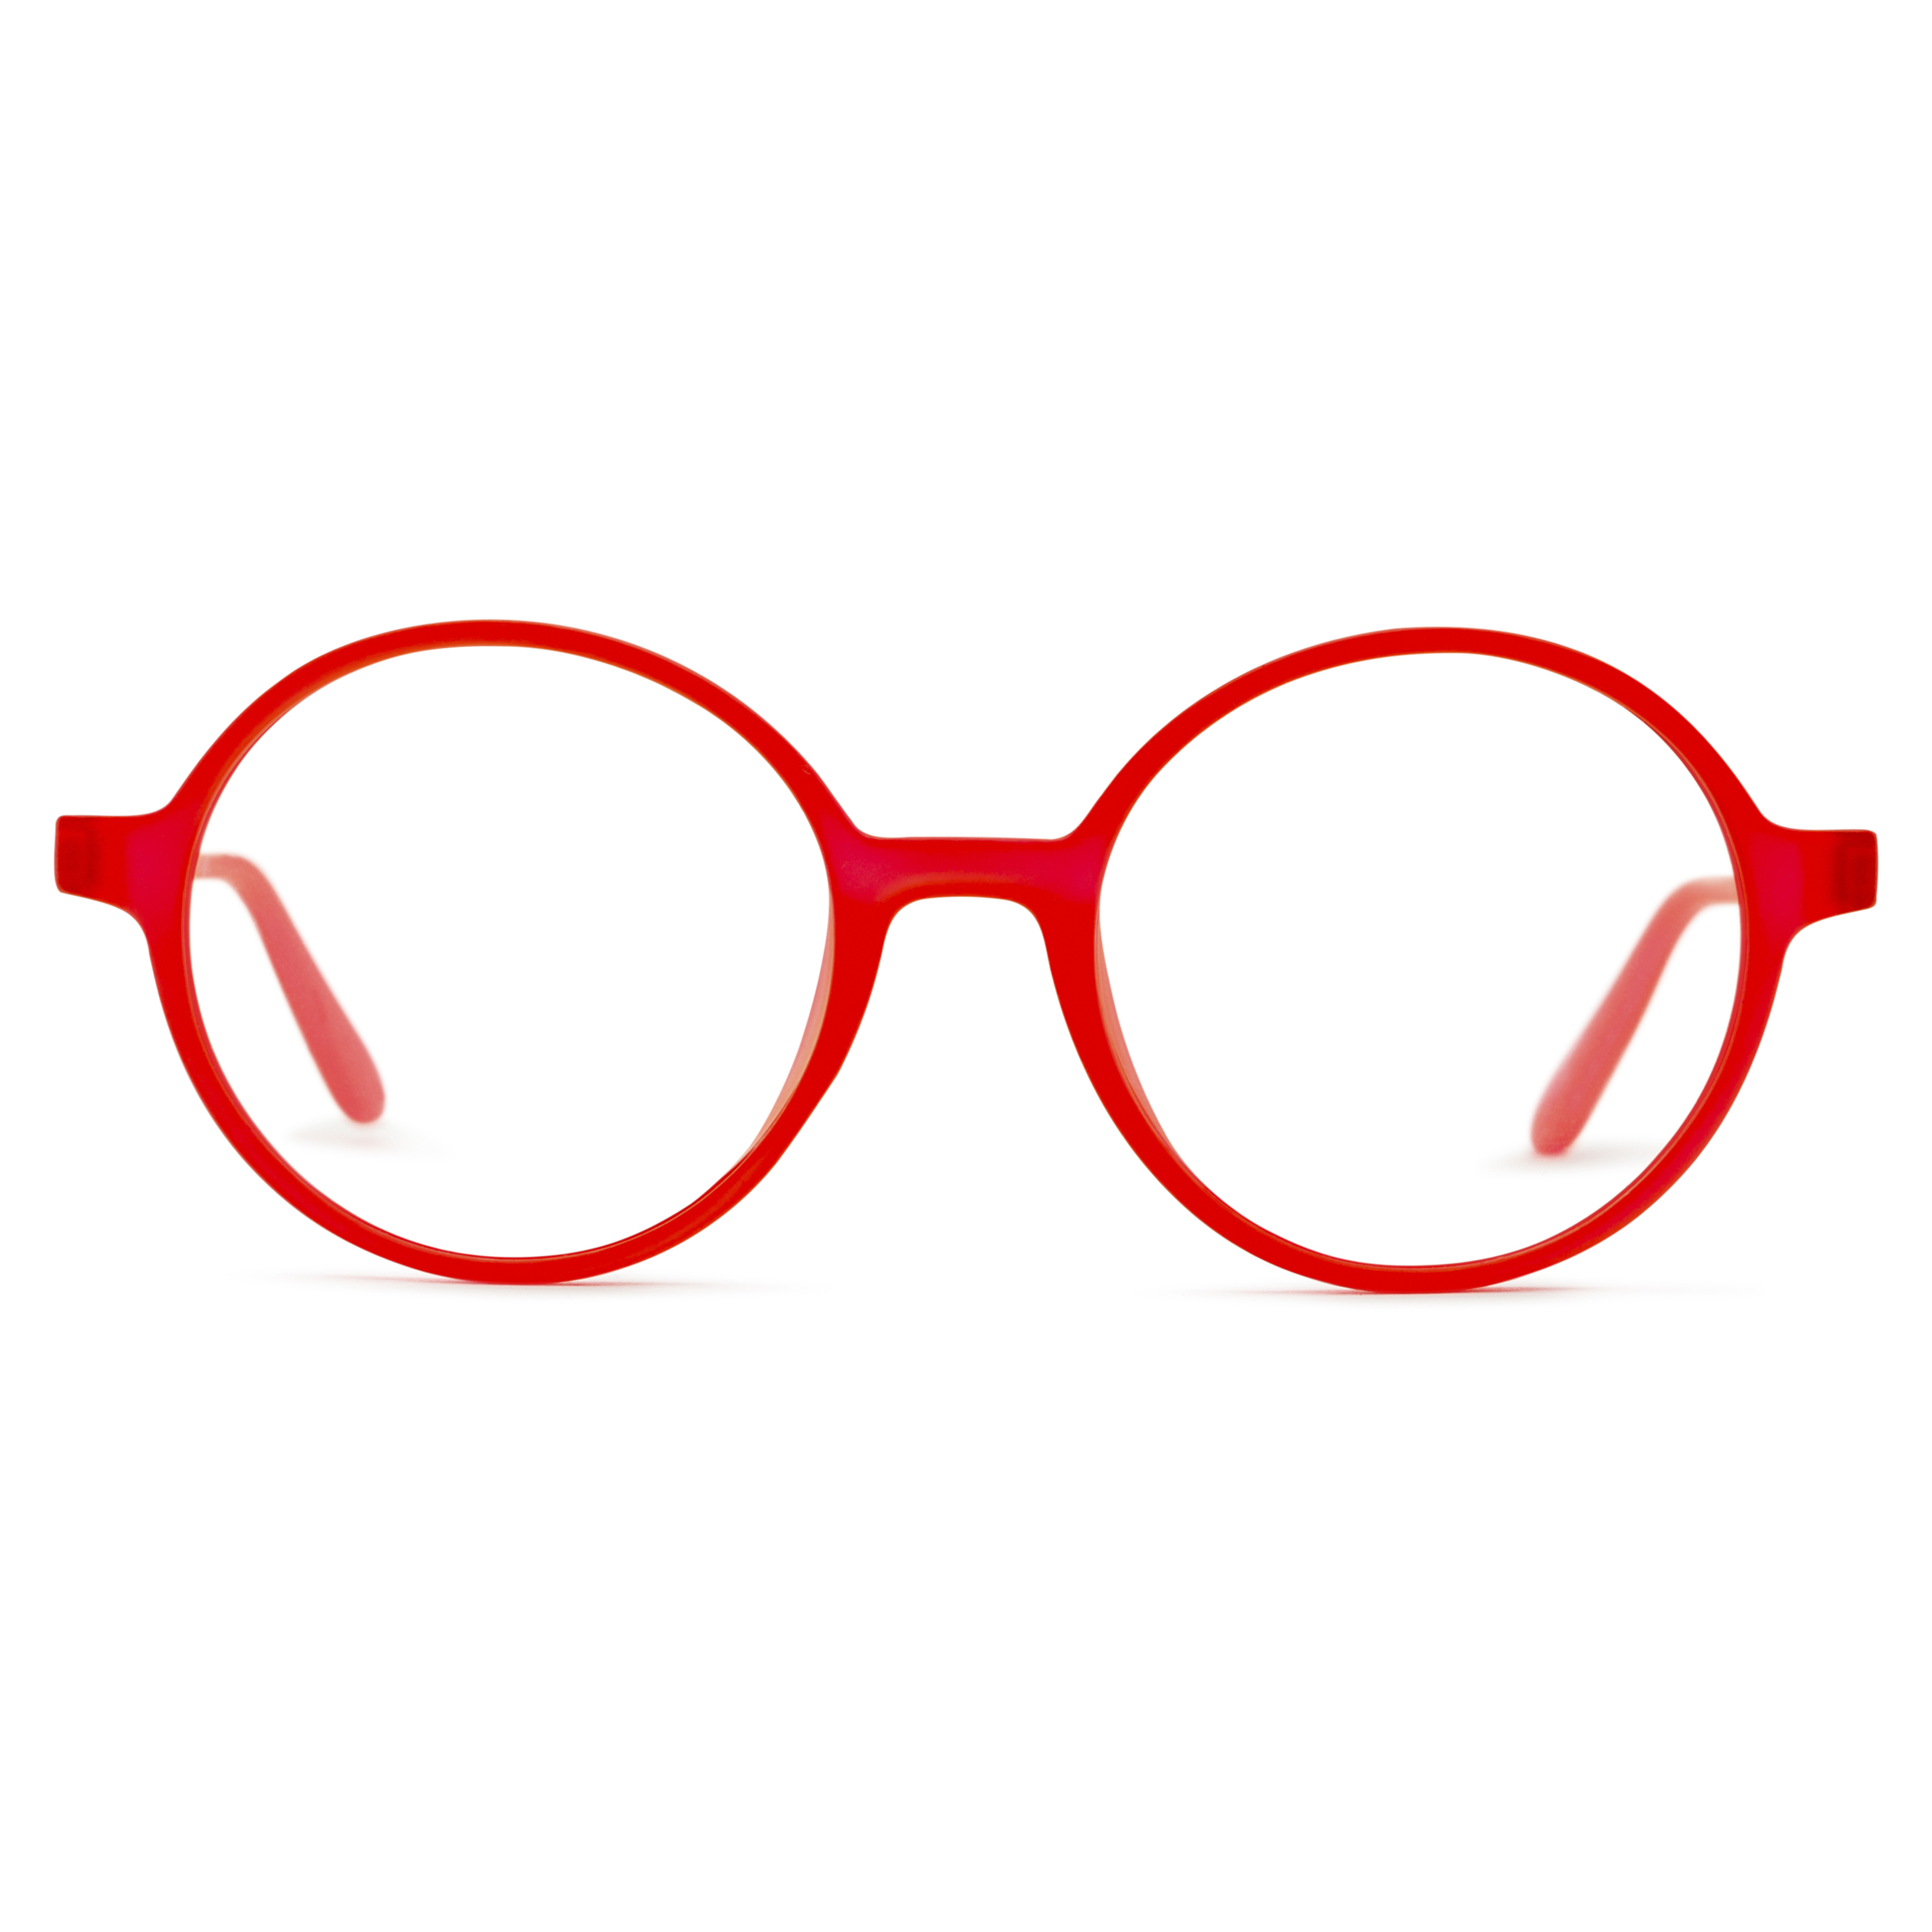 Women's Round Reading Glasses In Red By Foster Grant - Bartlett - +1.50